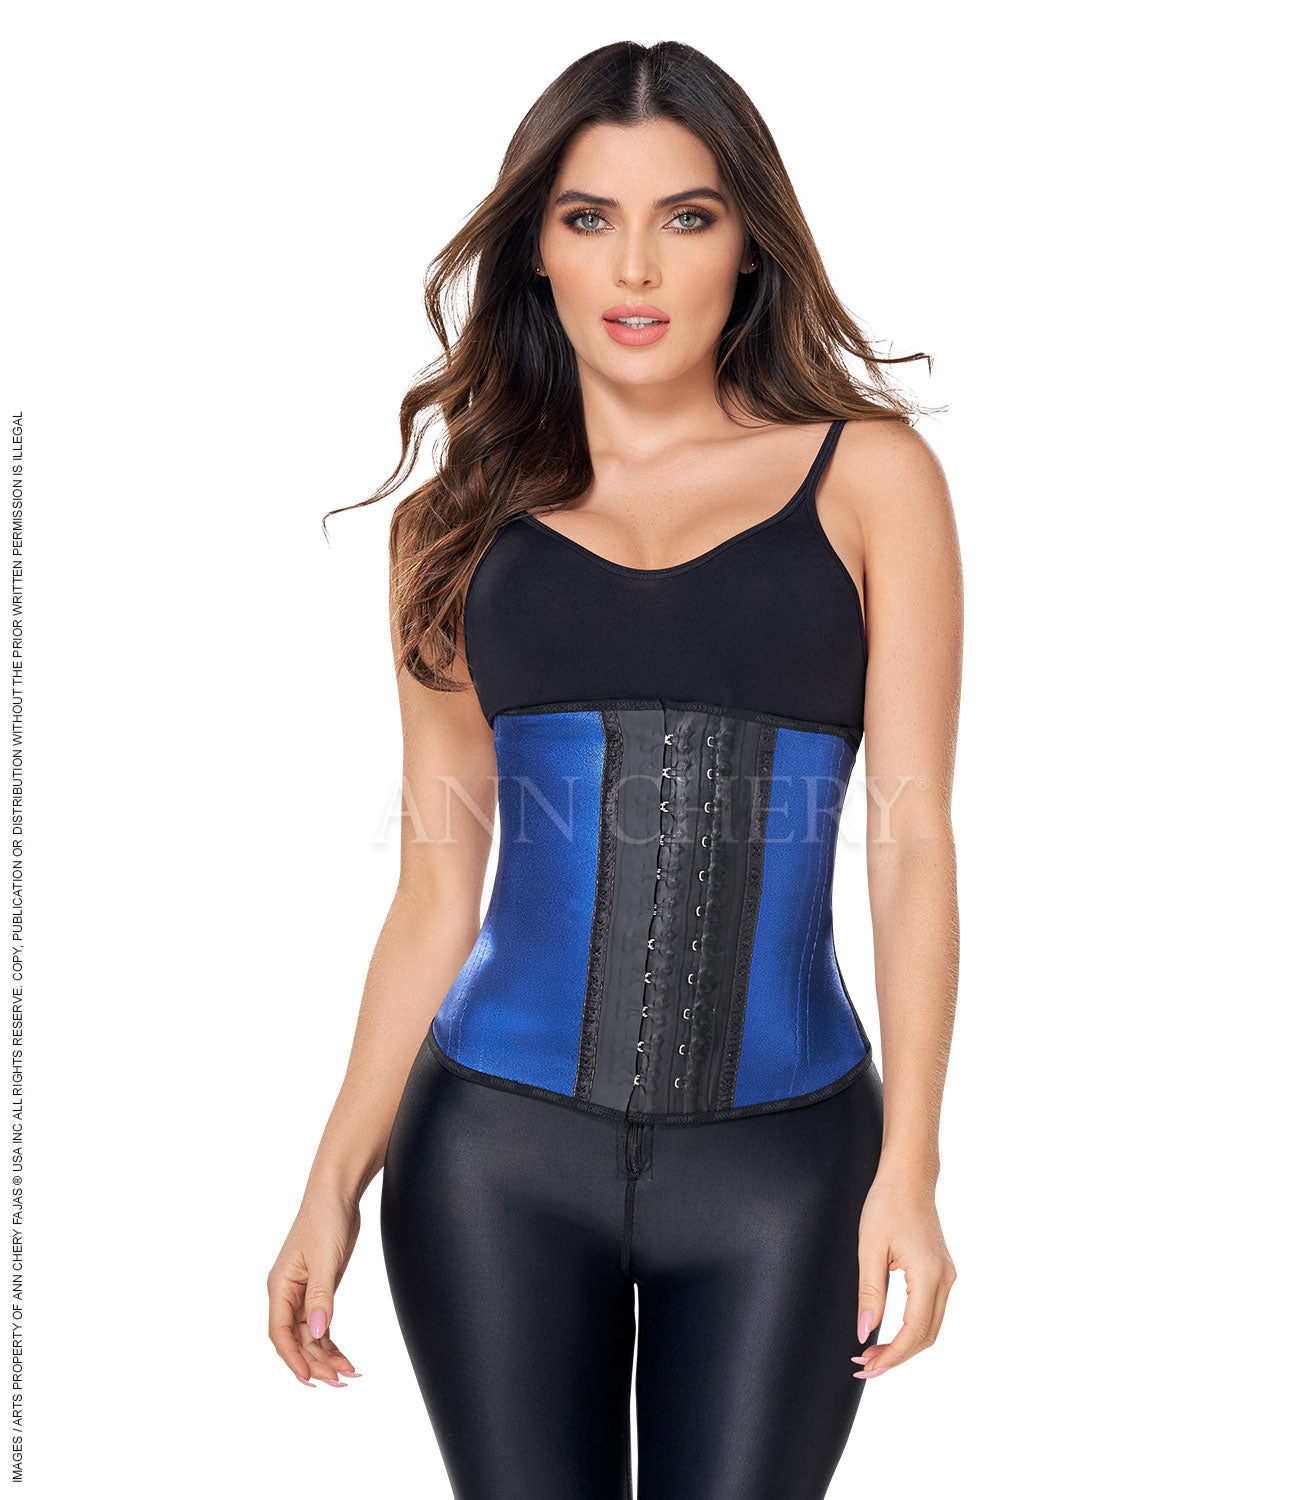 Surprise Mom this Mother's Day with our exclusive Colombian waist trainer! Special offer! Ref.2039